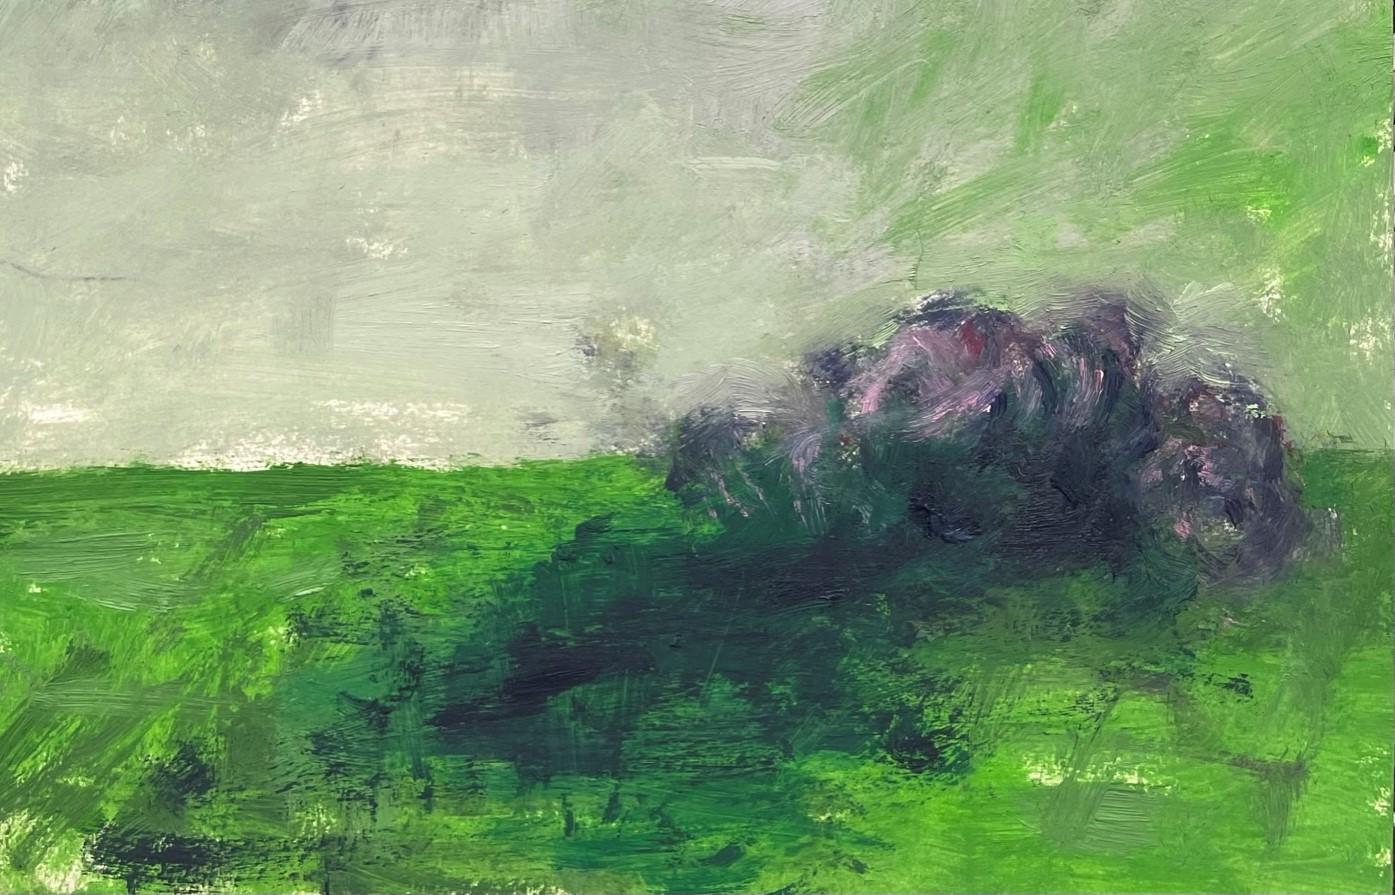 Remains (Body in the Field 15) - Contemporary, Abstract, Green, 21st Century - Gray Figurative Art by Zsolt Berszán